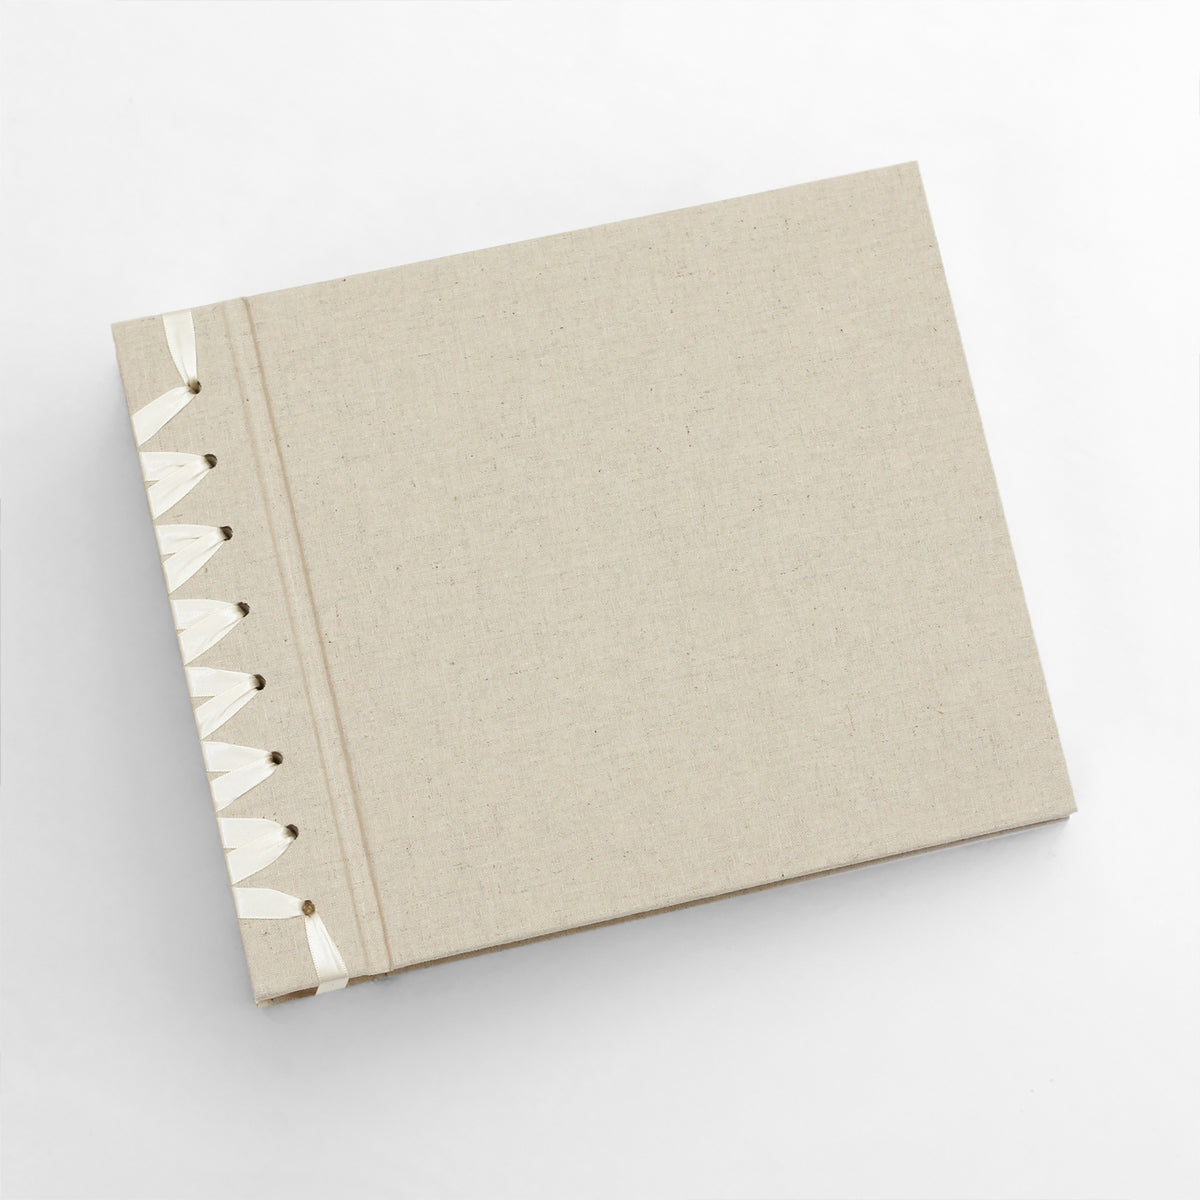 Small Paper Page Album with Natural Linen Cover